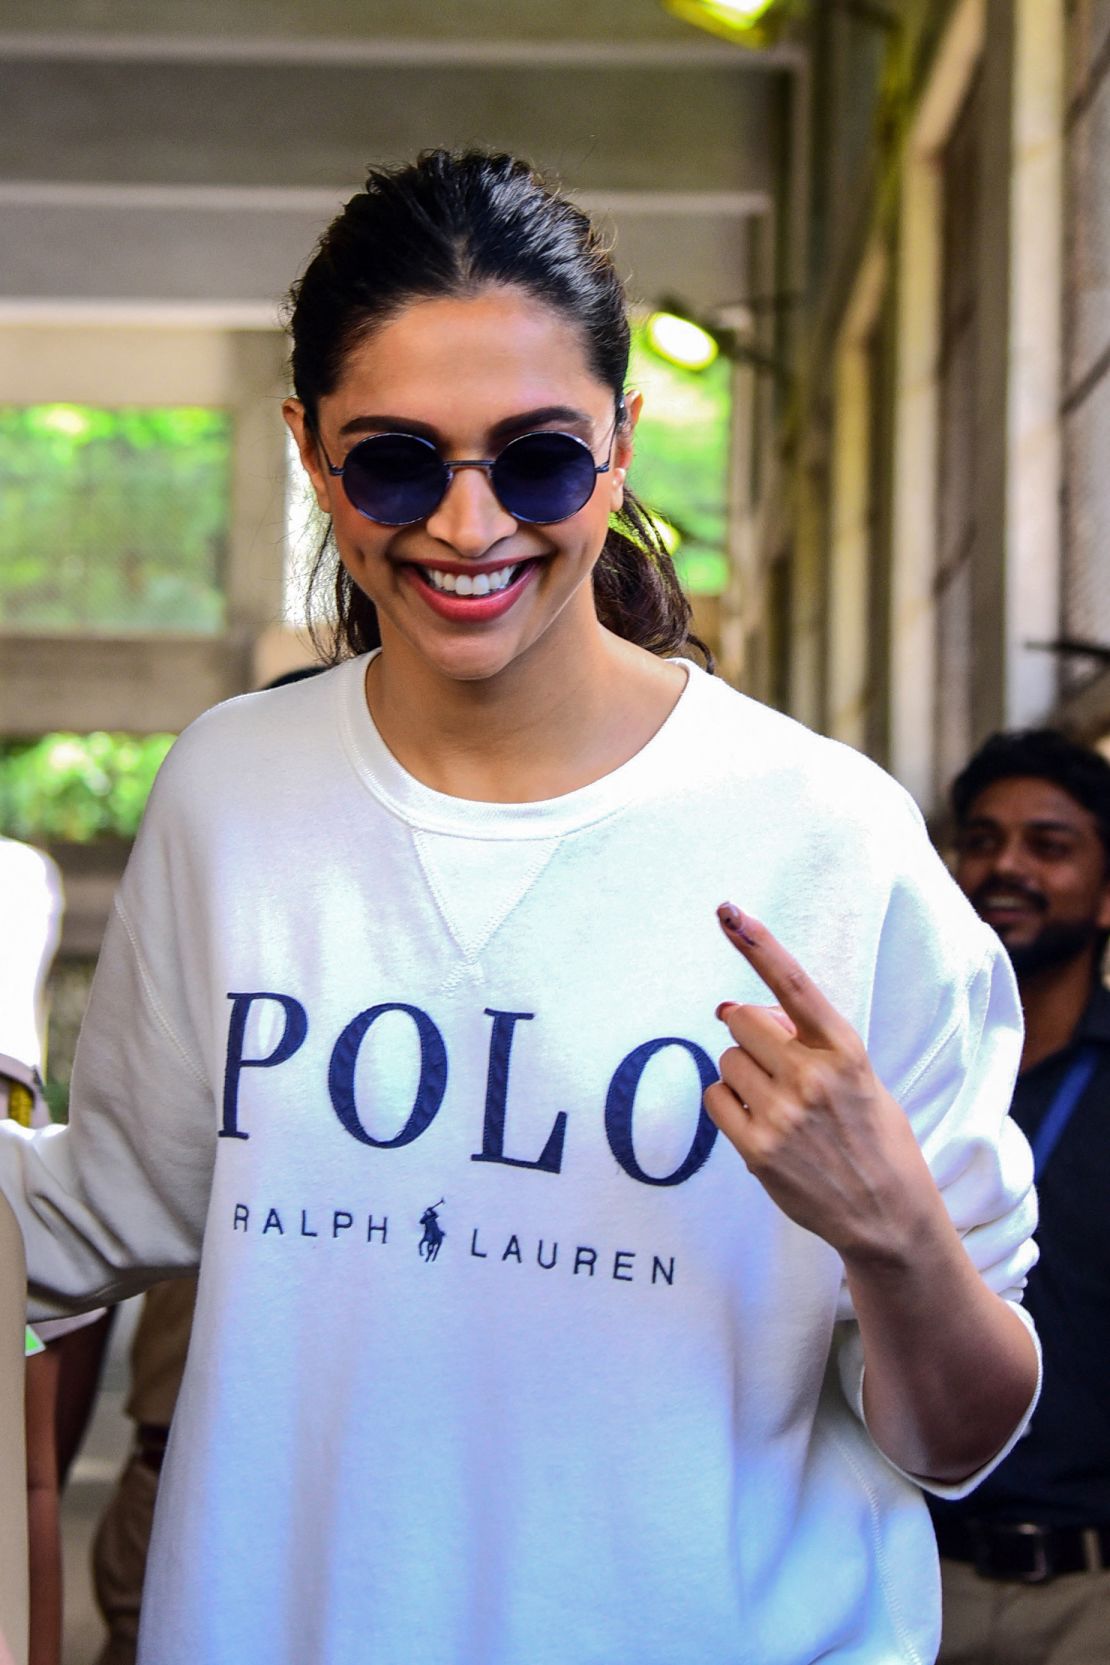 Bollywood actress Deepika Padukone shows her inked finger after casting her vote at a polling station during the state assembly election in Mumbai on October 21, 2019.